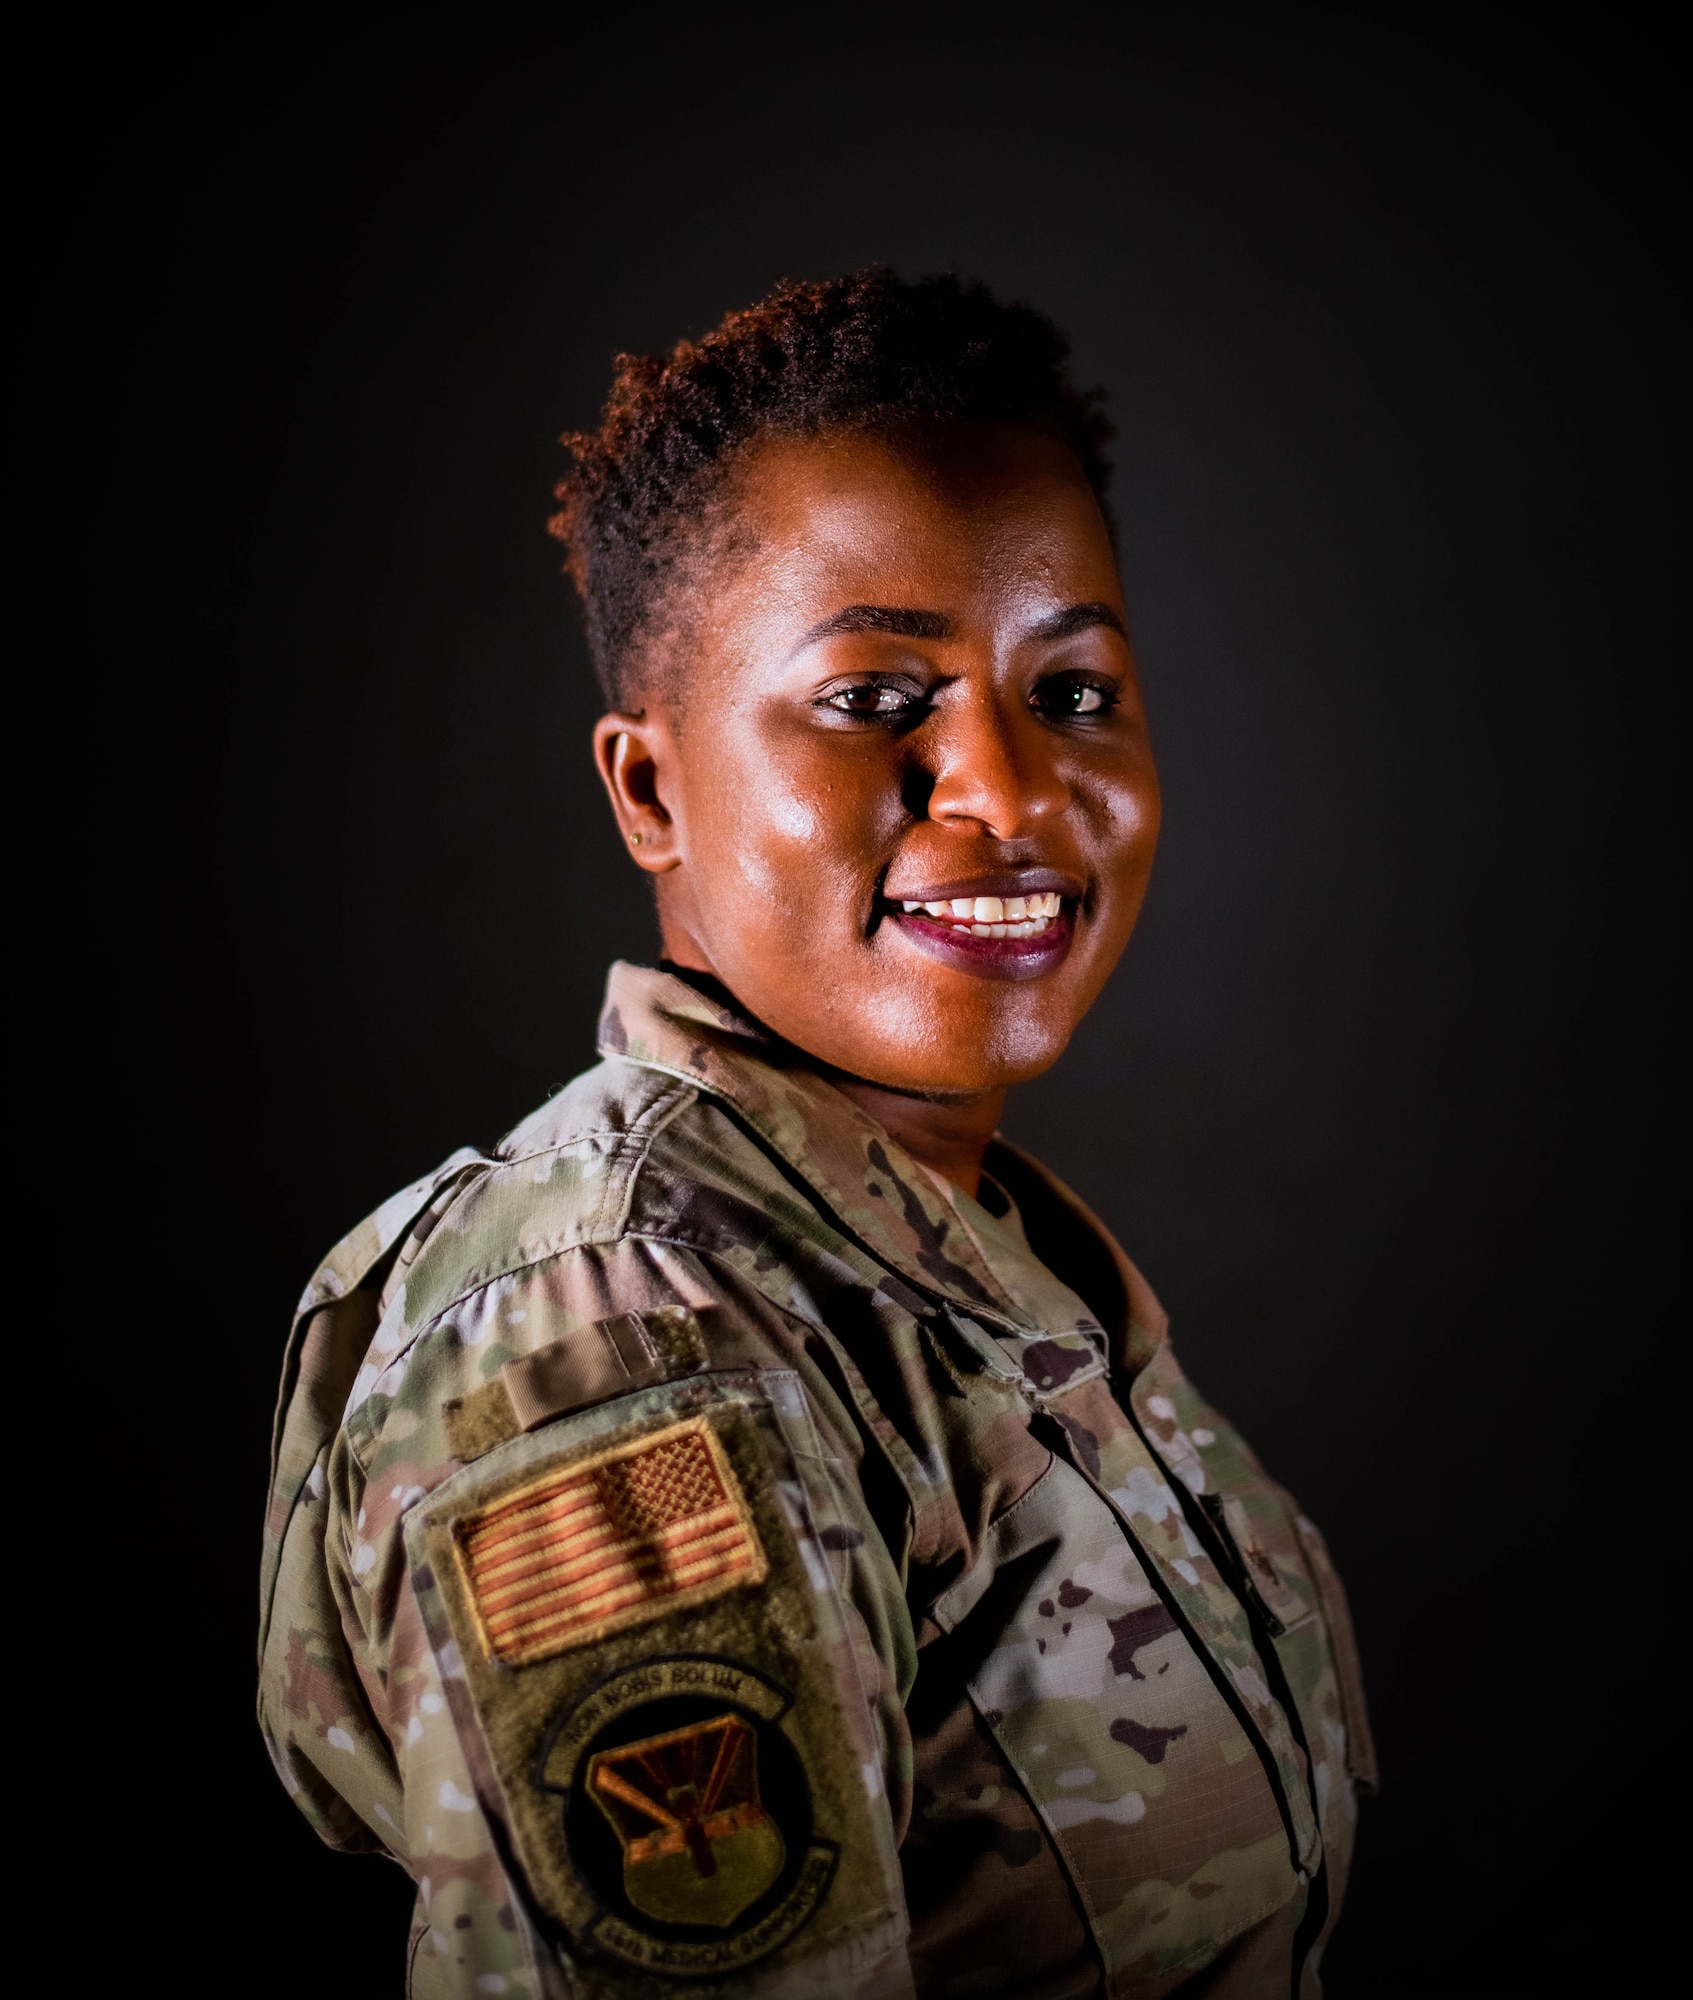 U.S. Air Force Staff Sgt. Winnie Adipo, 56th Medical Group noncommissioned officer in charge of personnel administration, poses for a studio photo.